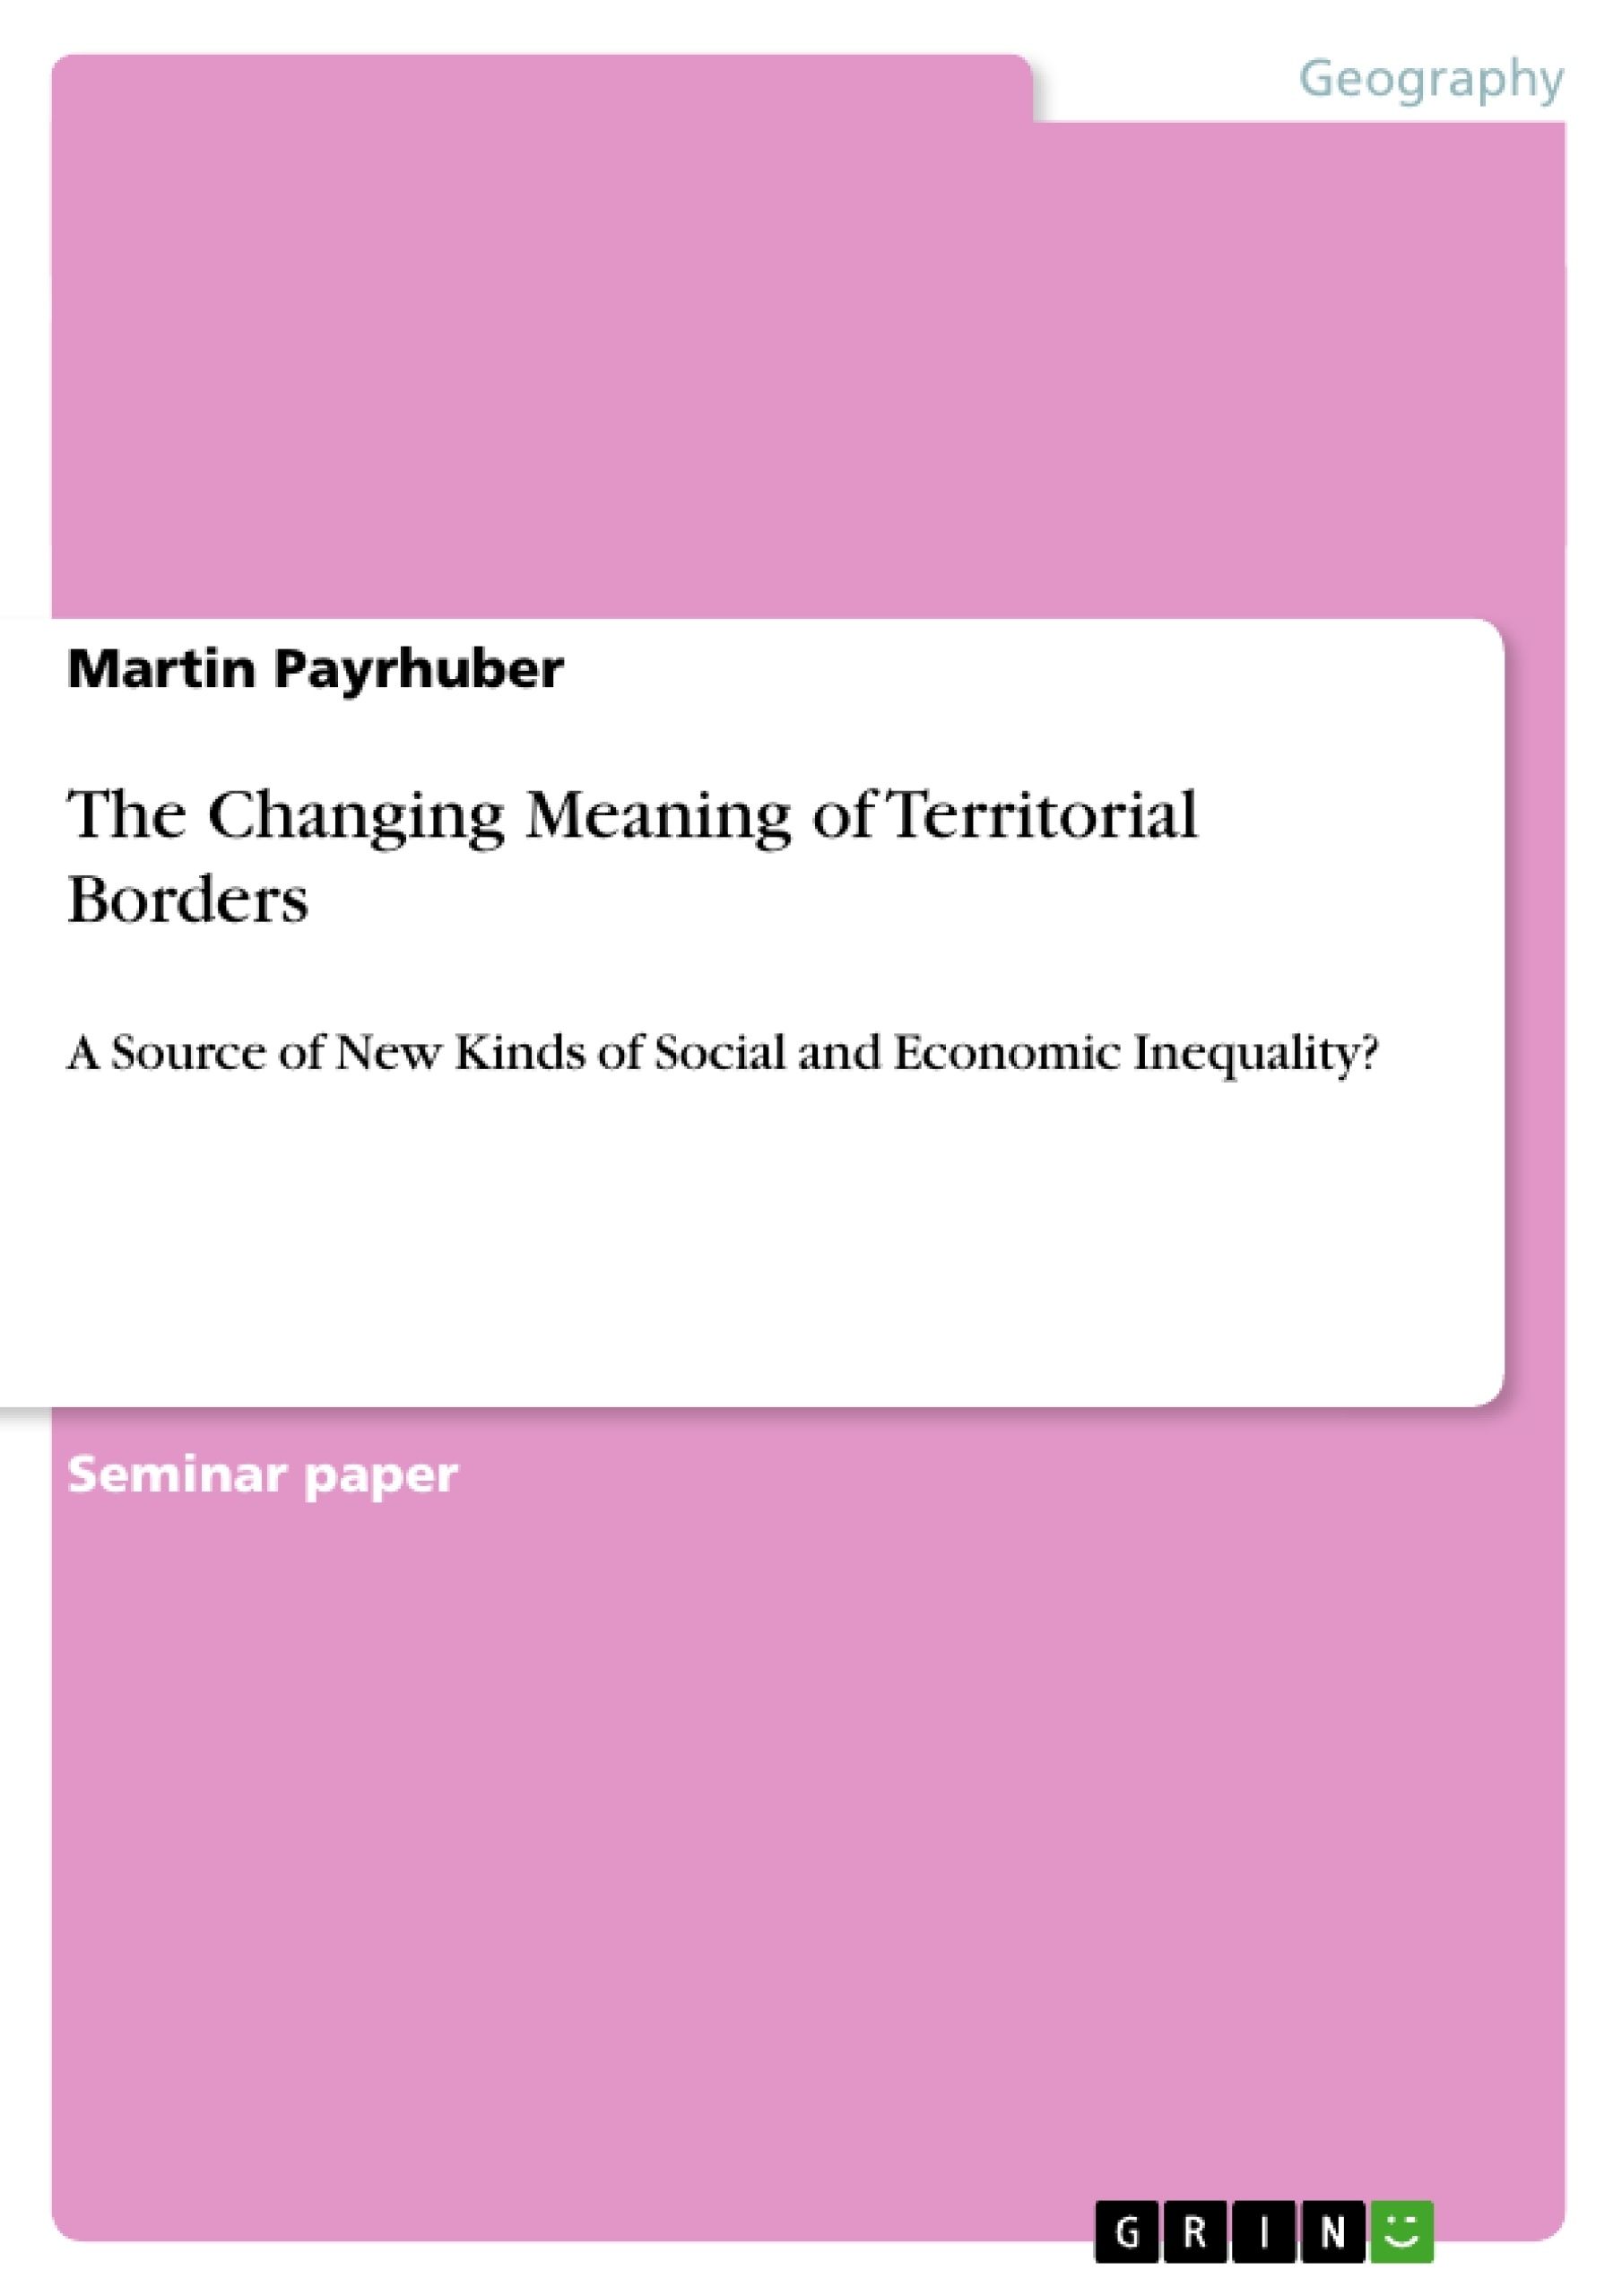 Title: The Changing Meaning of Territorial Borders